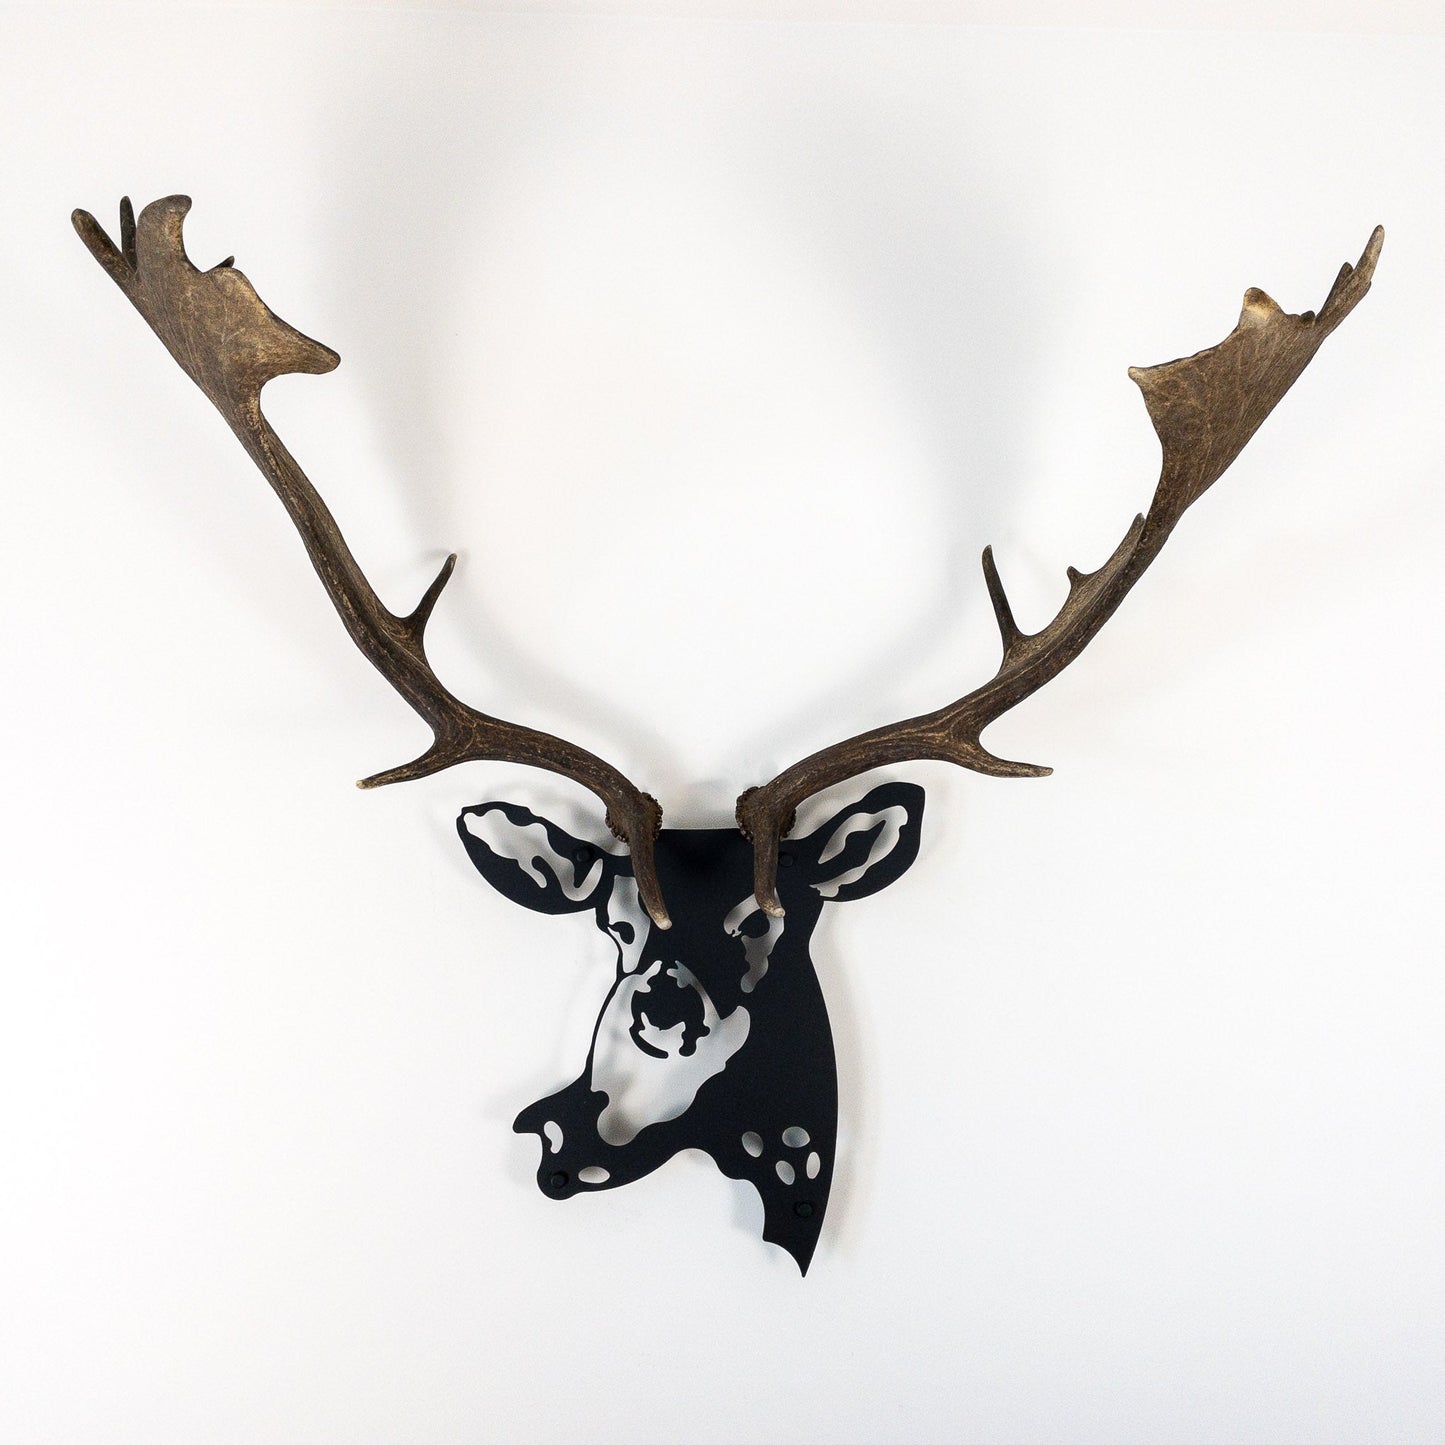 A metal wall decor made from real shed  Fallow Deer antlers mounted on a metal head